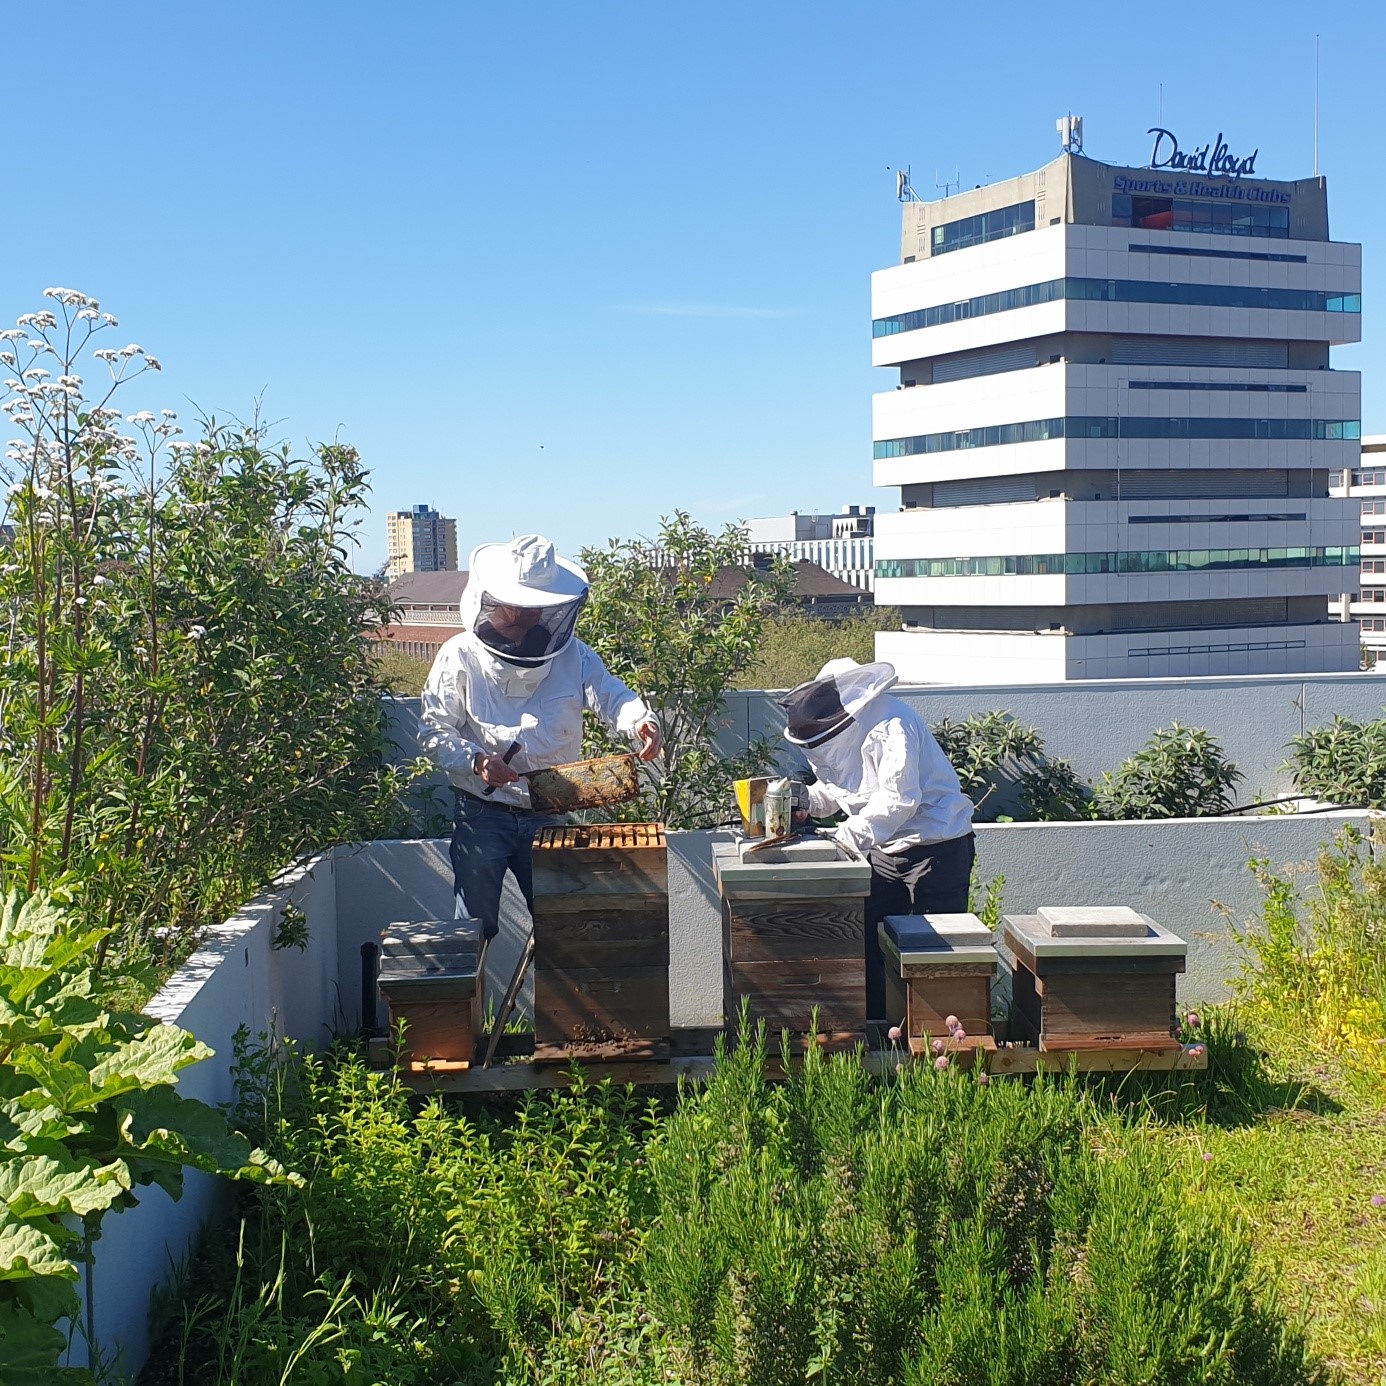 Wouter Bauman, nature and spactial planning consultant at the Rotterdam Environmental Center and also beekeeper affiliated with the Ambrosius Beekeepers Guild, is responsible for the management of the DakAkker, together with a large group of enthusiastic volunteers.